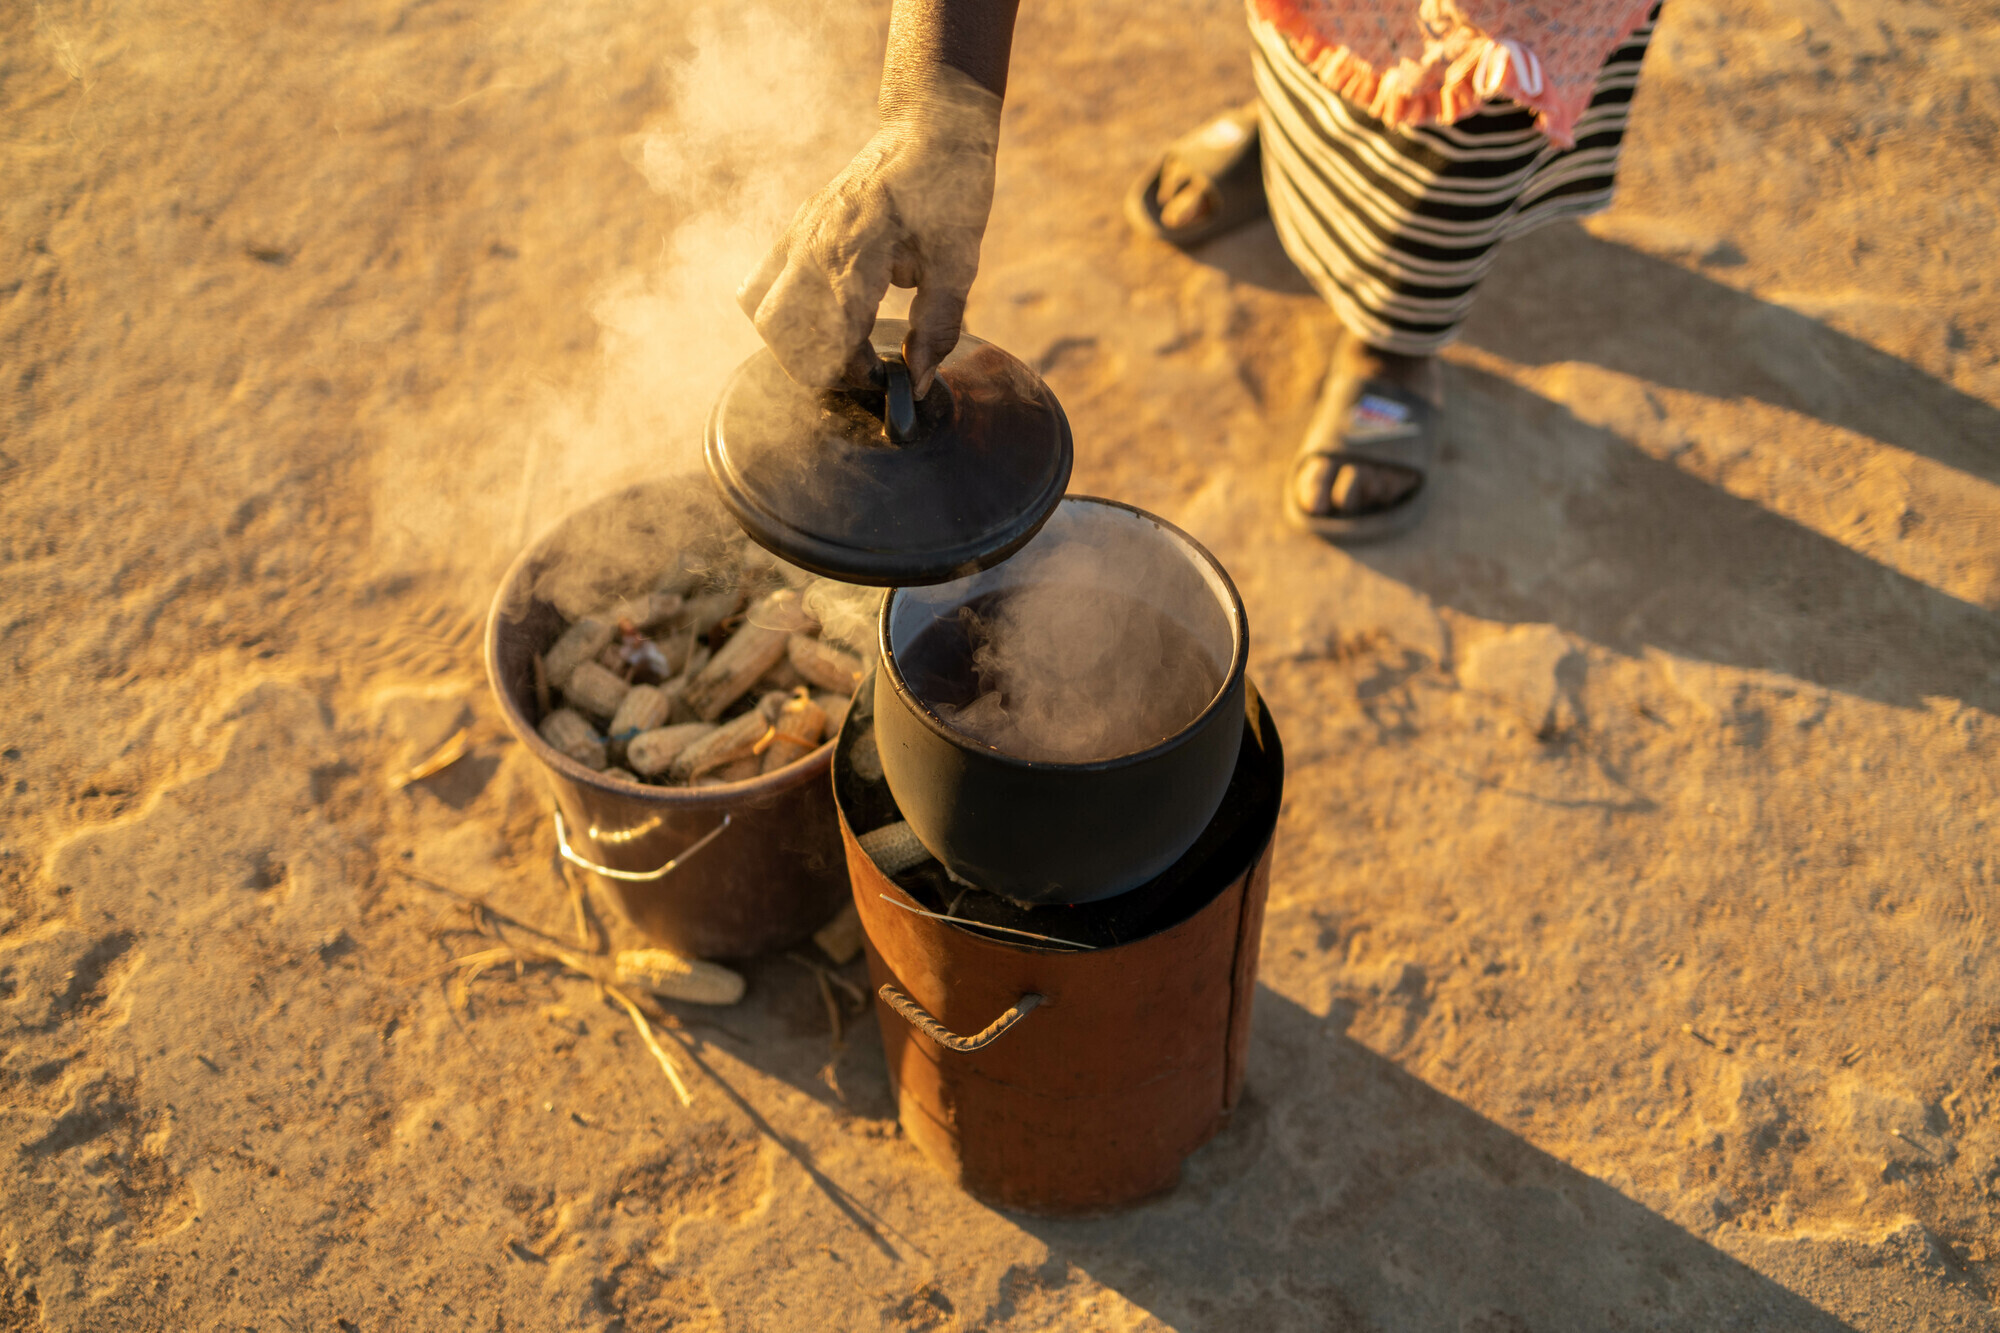 pot cooking on a fuel-efficient stove beside a bucket of corn cobs